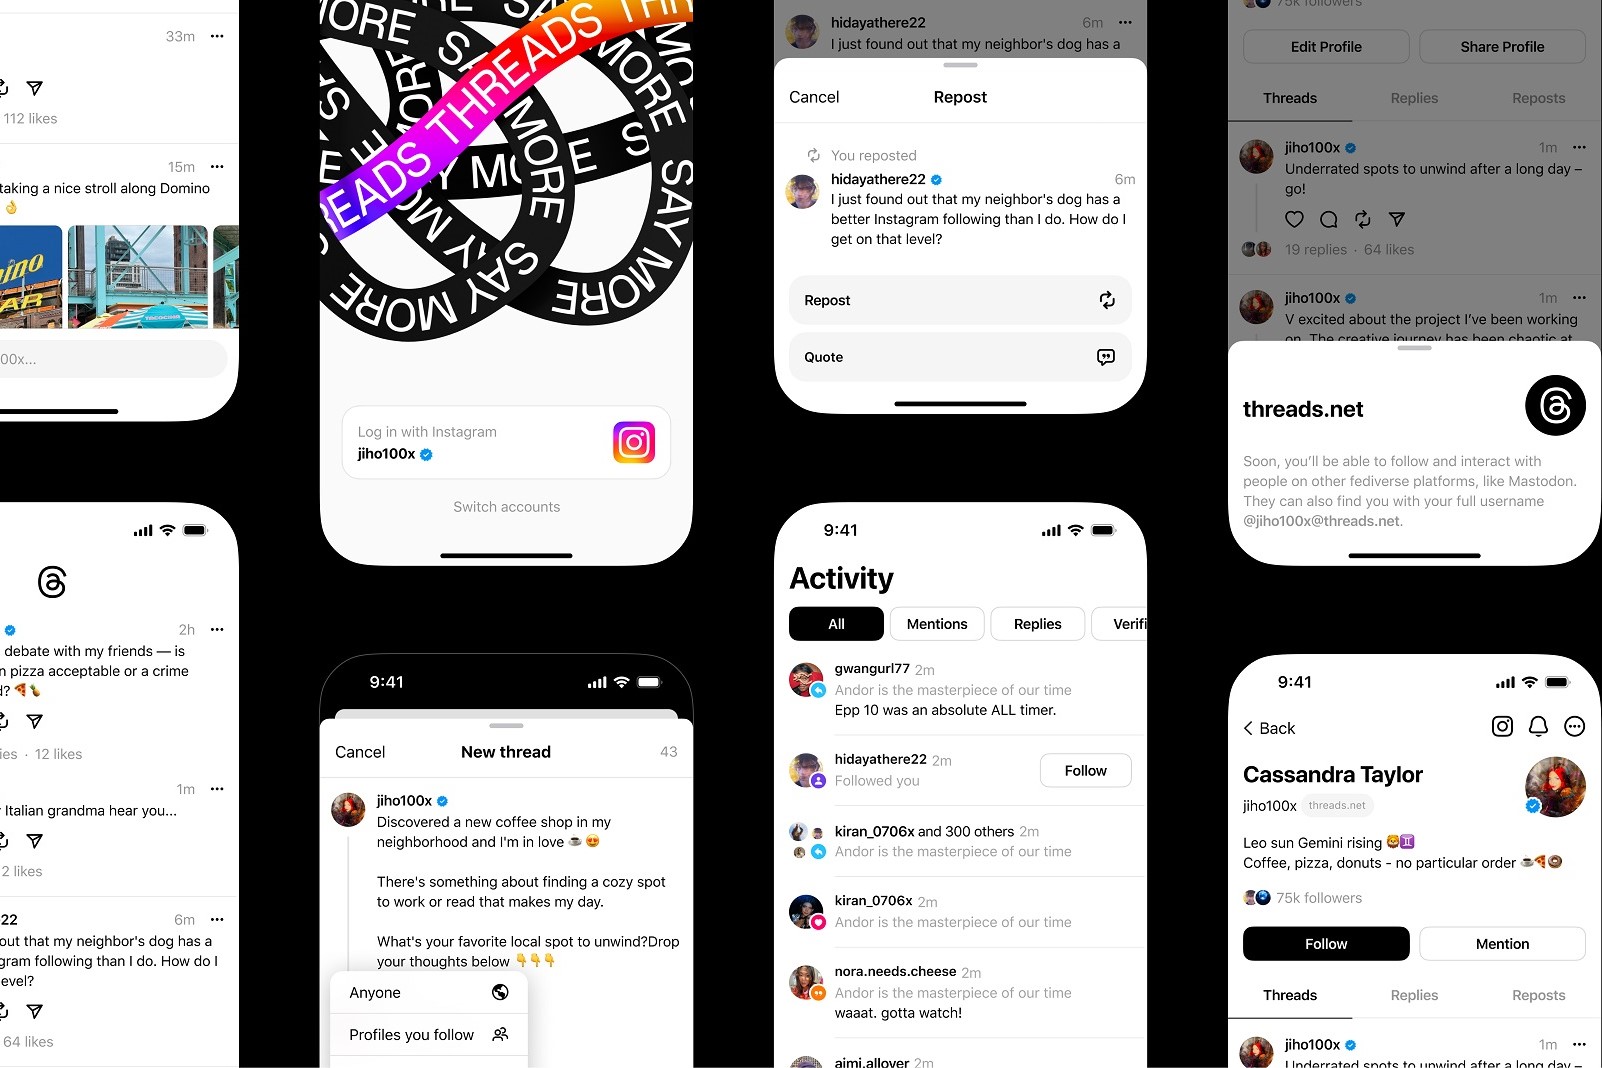 A series of mobile screenshots showing off the Threads app on a black background.